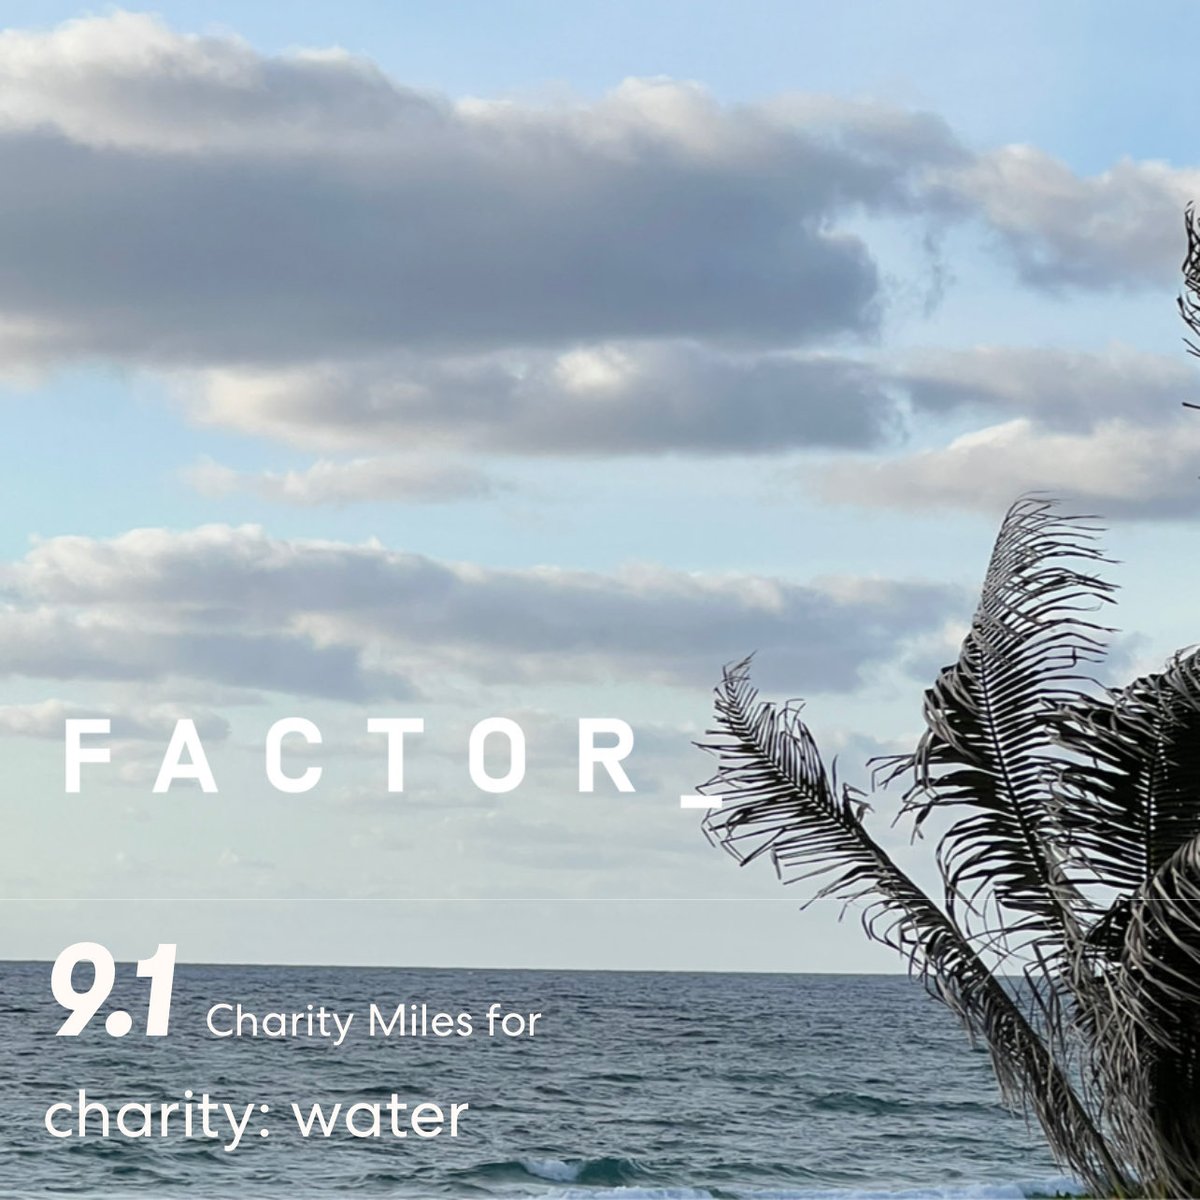 9.1 ⁦@CharityMiles⁩ Miles for ⁦@charitywater⁩ : water. Thanks to everyone who has sponsored me!
miles.app.link/e/O2V2mg3VRIb